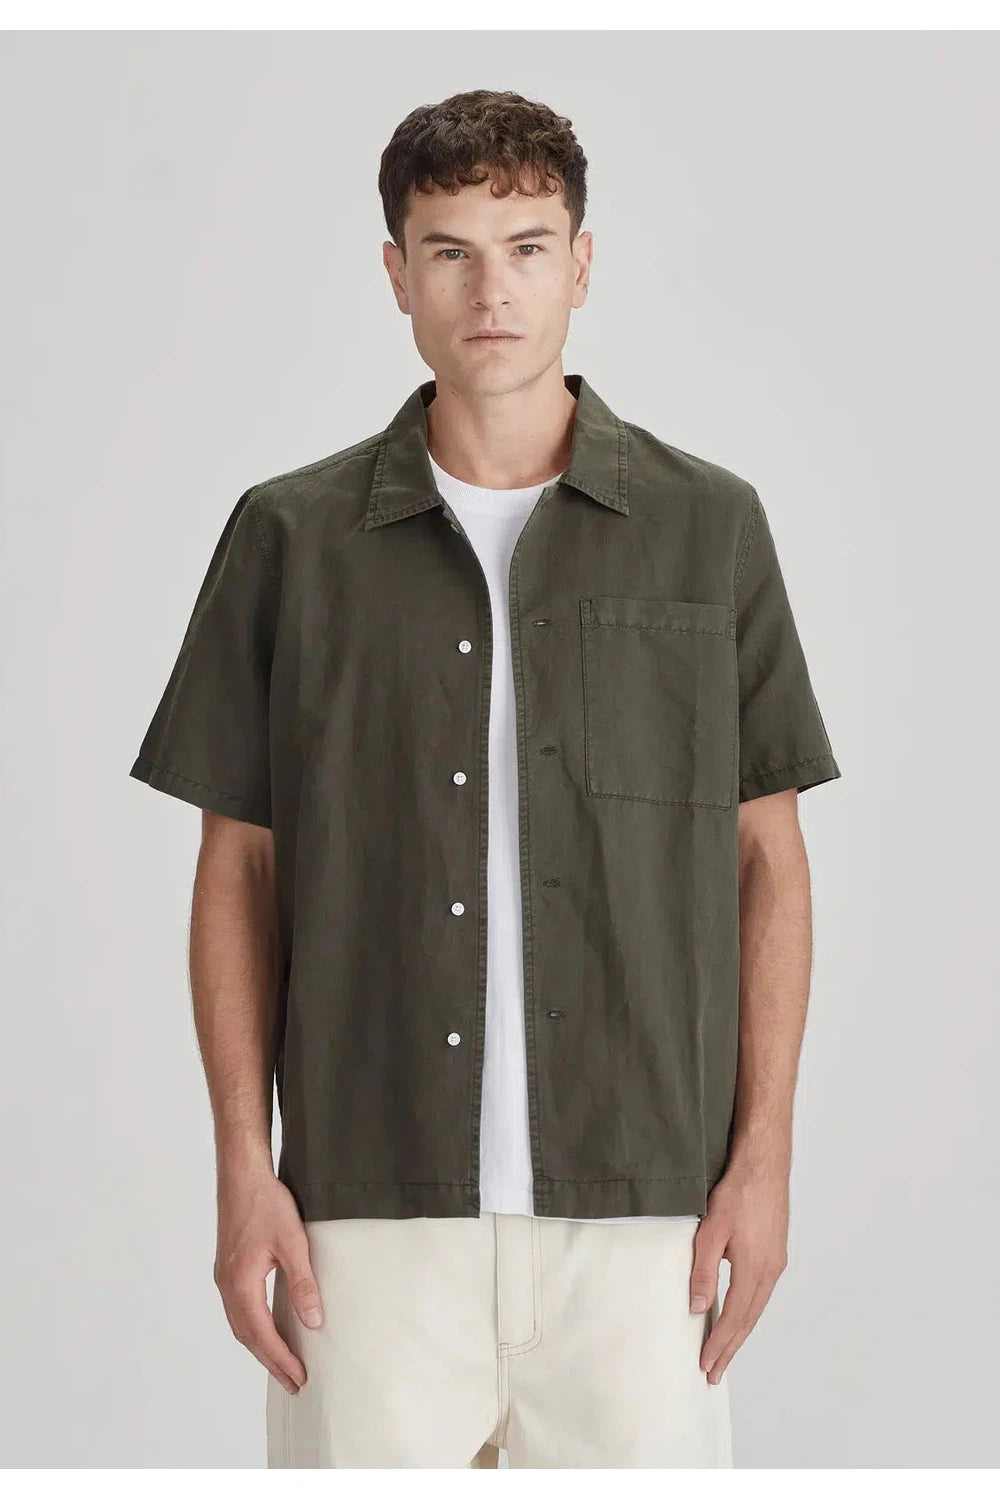 Commoners Campus SS Shirt - Olive Grey | COMMONERS | Mad About The Boy